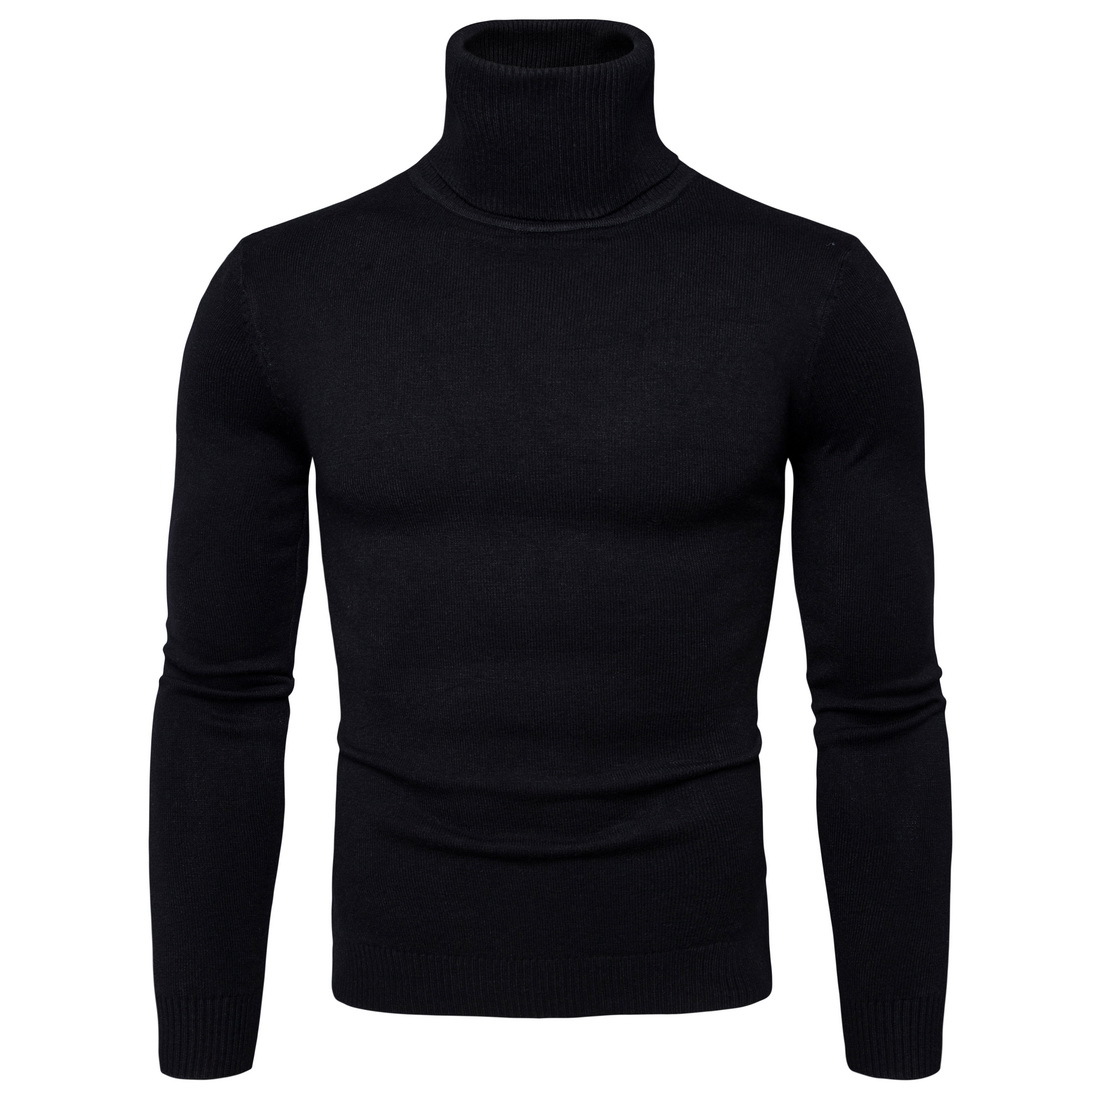 Men Knitted Sweater Autumn Winter Turtleneck Long Sleeve Casual Slim Pullover Tops black